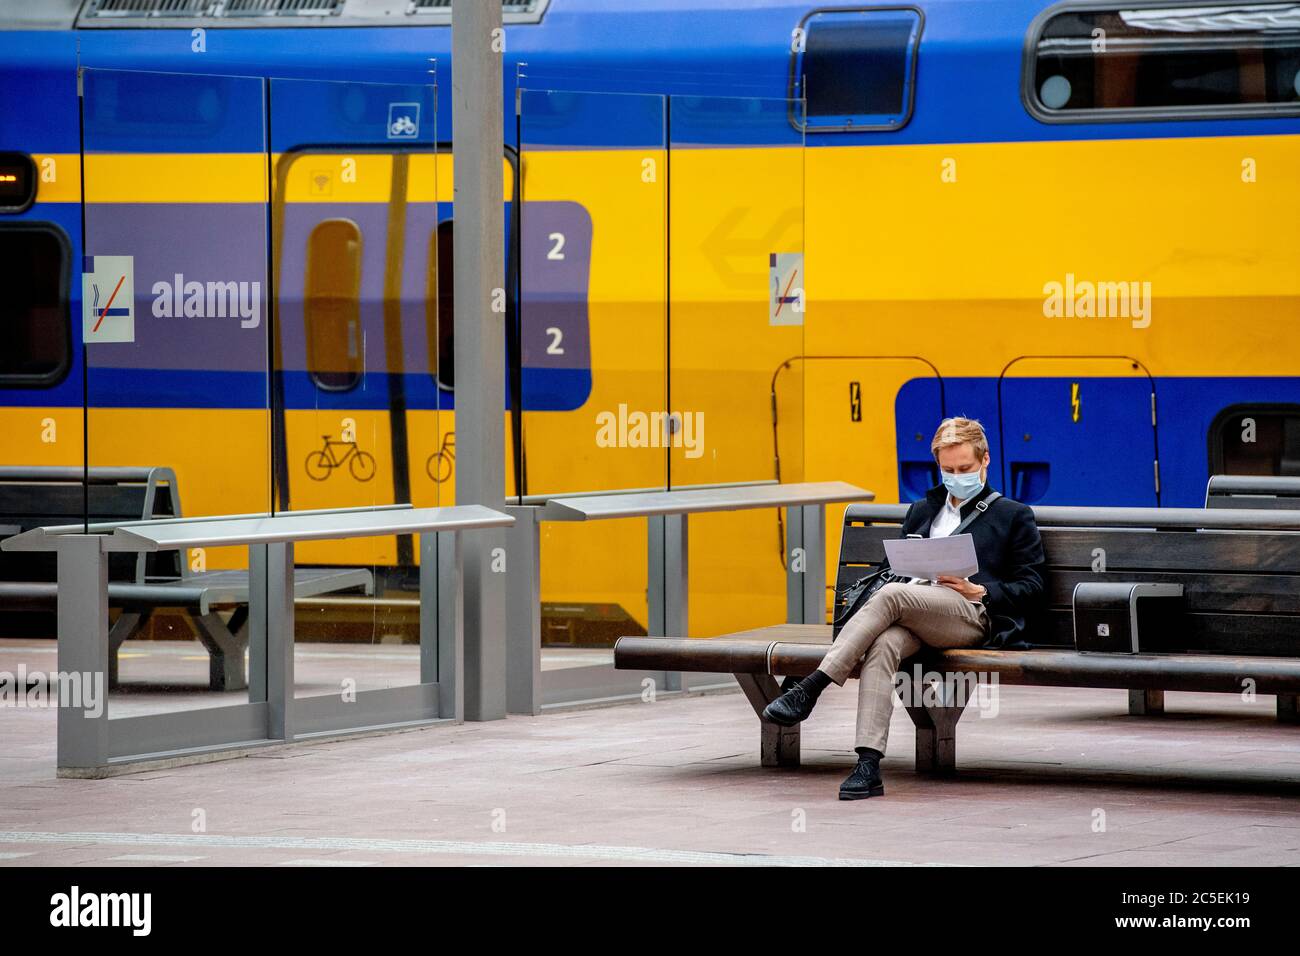 A man wearing a facemask is seen seated outside the train while reading papers at a train station.Residents of Rotterdam can take the train starting 1 July with mandatory wearing of face masks. In addition, all seats can be used on buses, trams, metros and trains. The Dutch Railways (NS) will however shrink considerably in the next five years due to the coronavirus crisis as the transport company expects to cut 2,300 jobs. Stock Photo